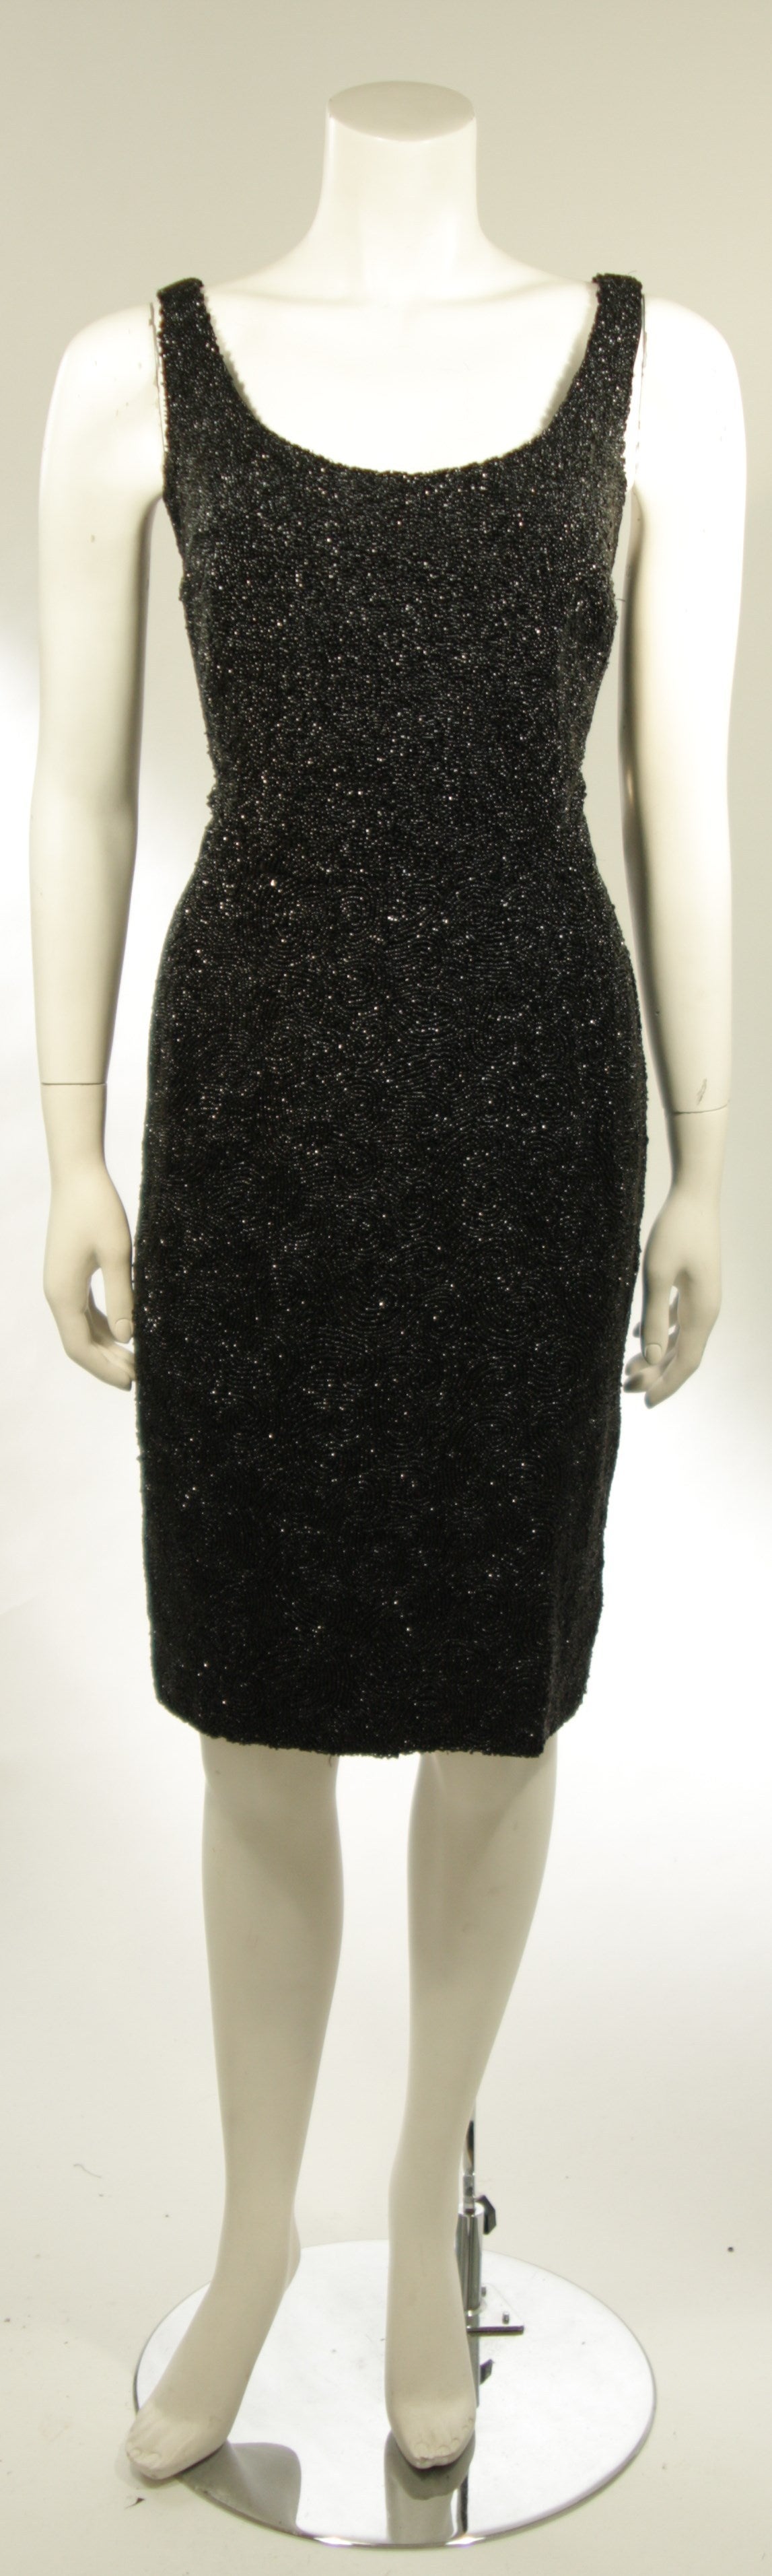 This spectacular cocktail dress is circa 1960's and is beautifully beaded. There is a center back zipper. Excellent condition. 

Measures (Approximately)
Length: 40.5